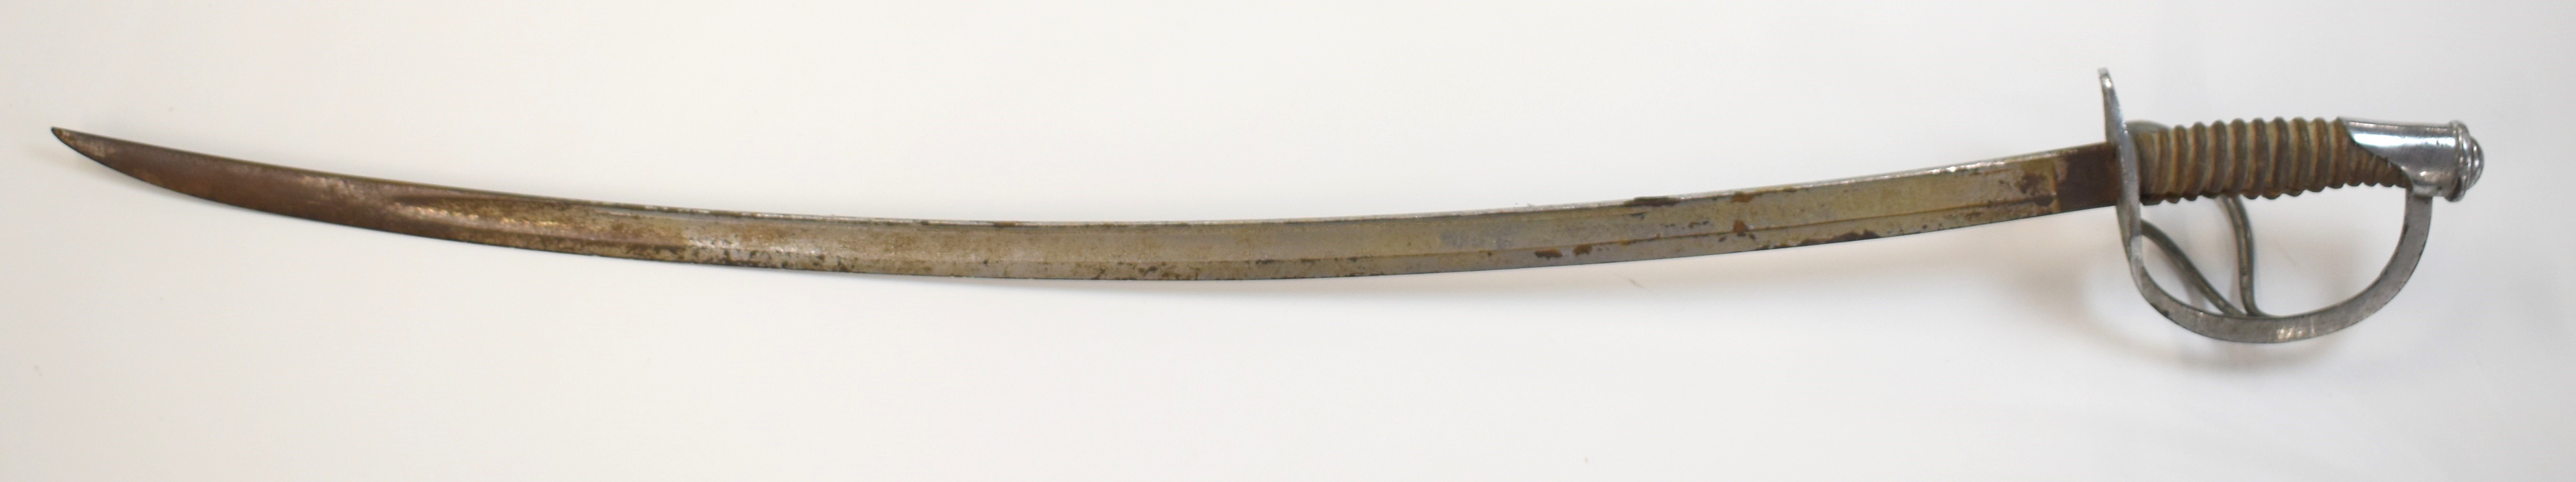 American Civil War sword with wooden grip, two bar hilt, US 1864 AGM to ricasso and Crosby - Image 23 of 26